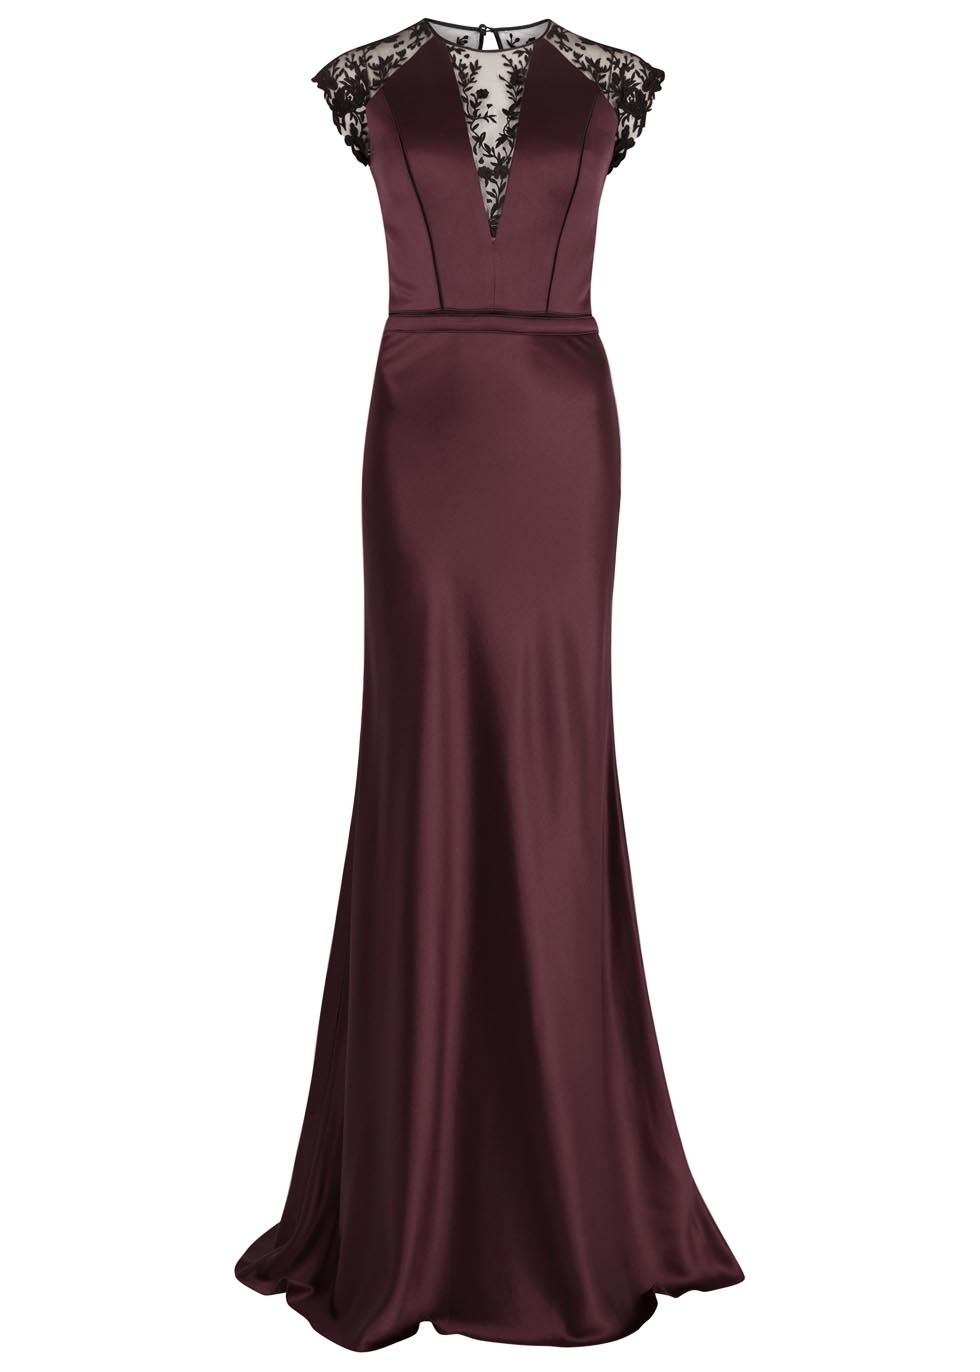 Burgundy lace panelled silk gown